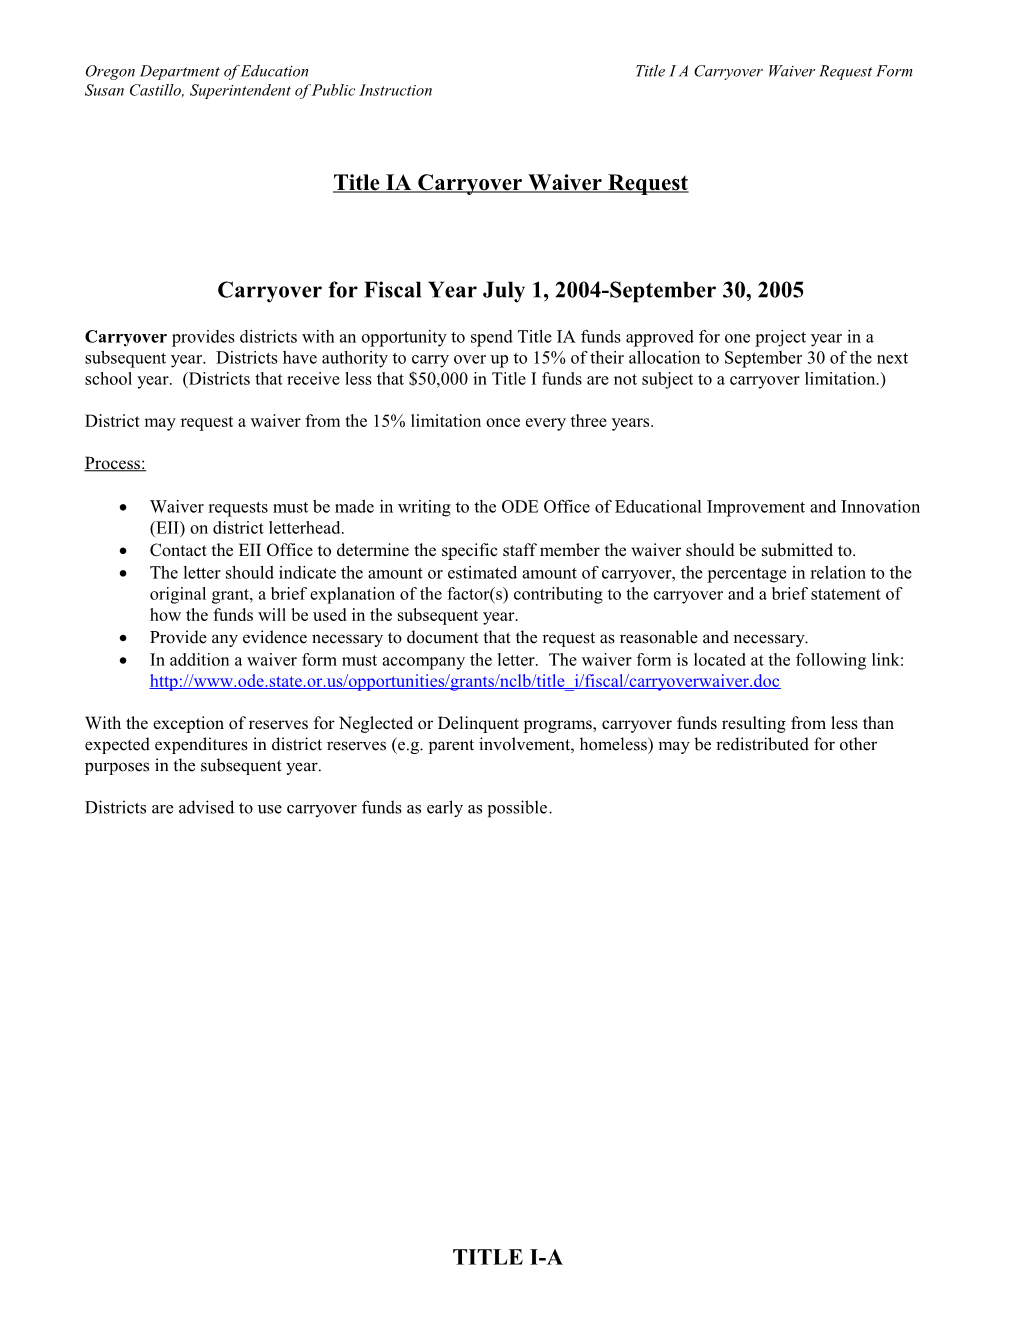 Oregon Department of Educationtitle I a Carryover Waiver Request Form